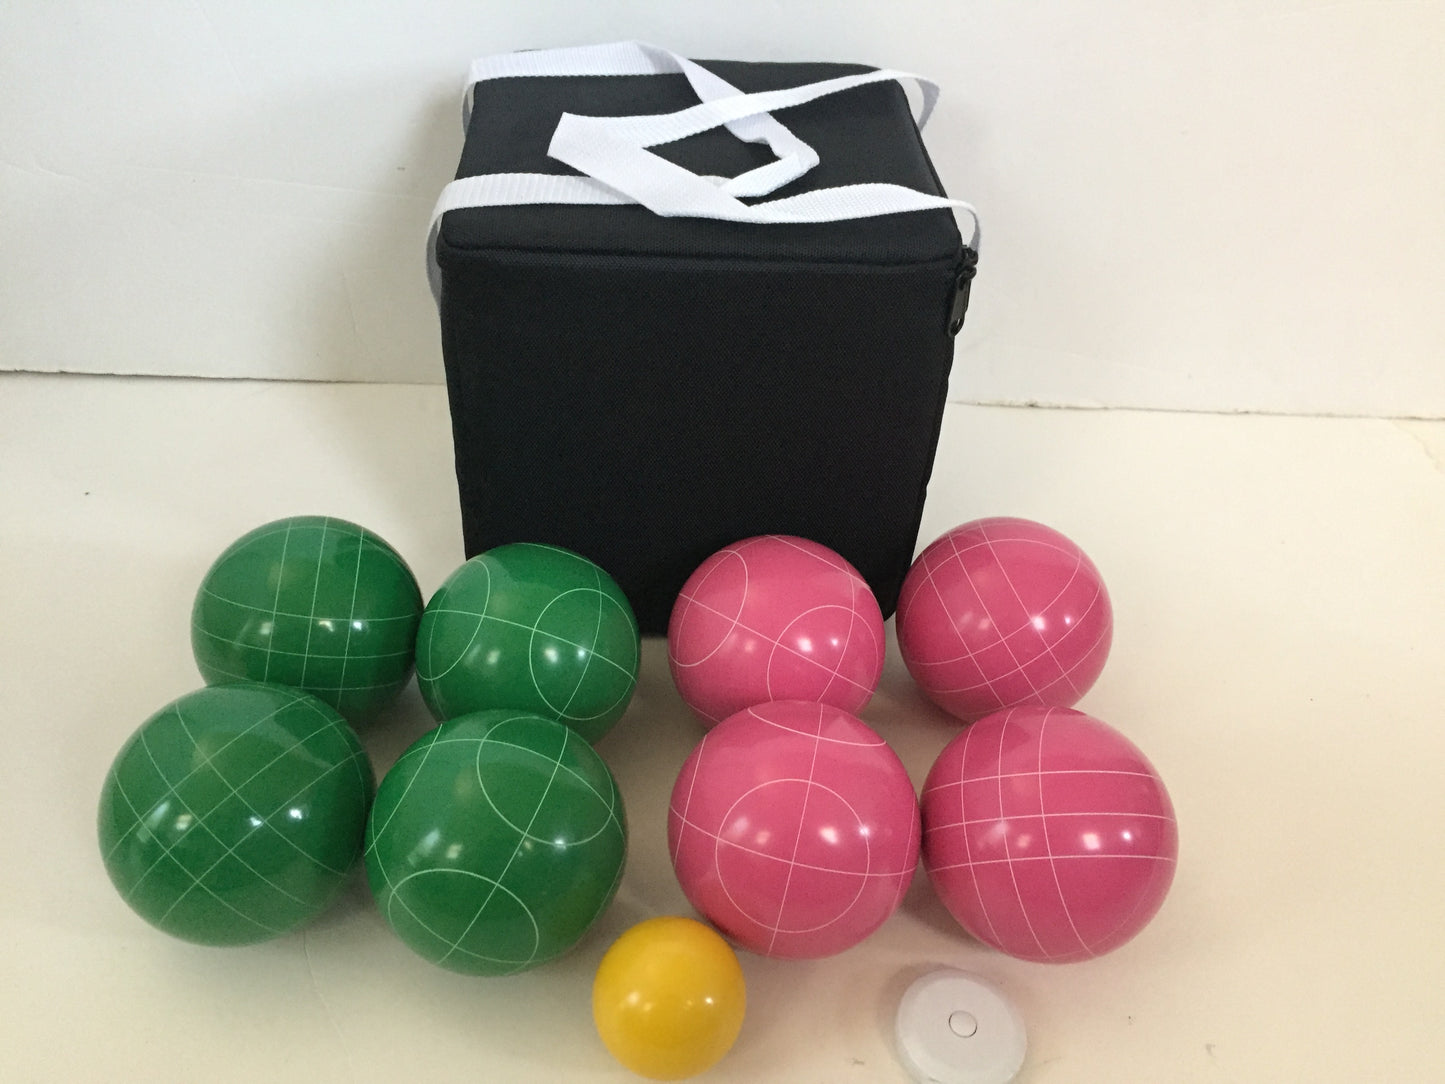 107mm with Green and Pink Balls with Black Bag